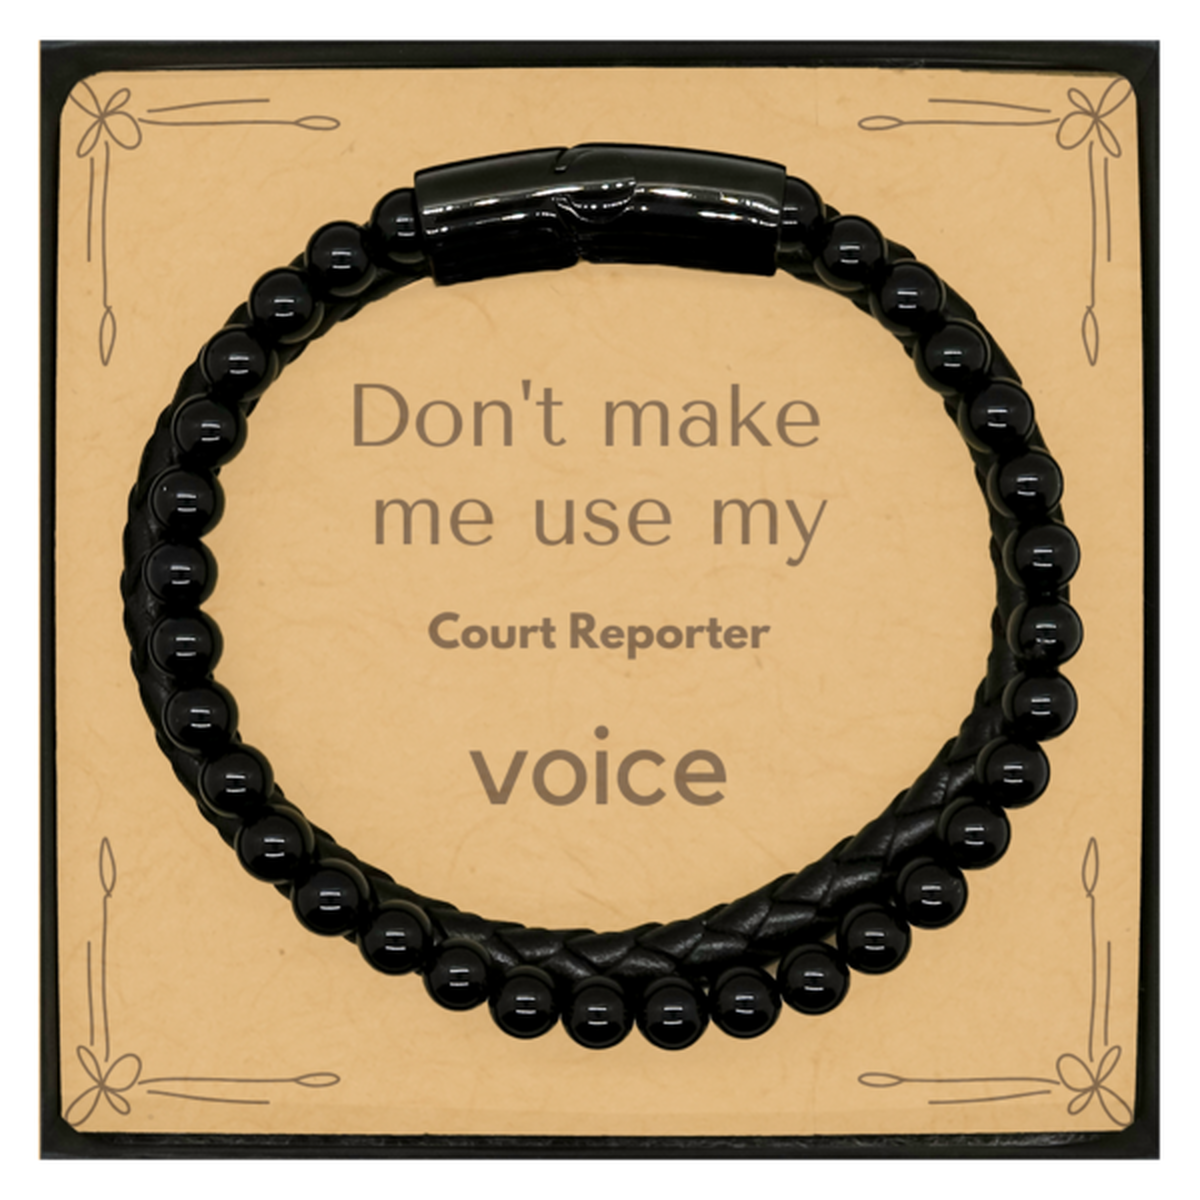 Don't make me use my Court Reporter voice, Sarcasm Court Reporter Card Gifts, Christmas Court Reporter Stone Leather Bracelets Birthday Unique Gifts For Court Reporter Coworkers, Men, Women, Colleague, Friends